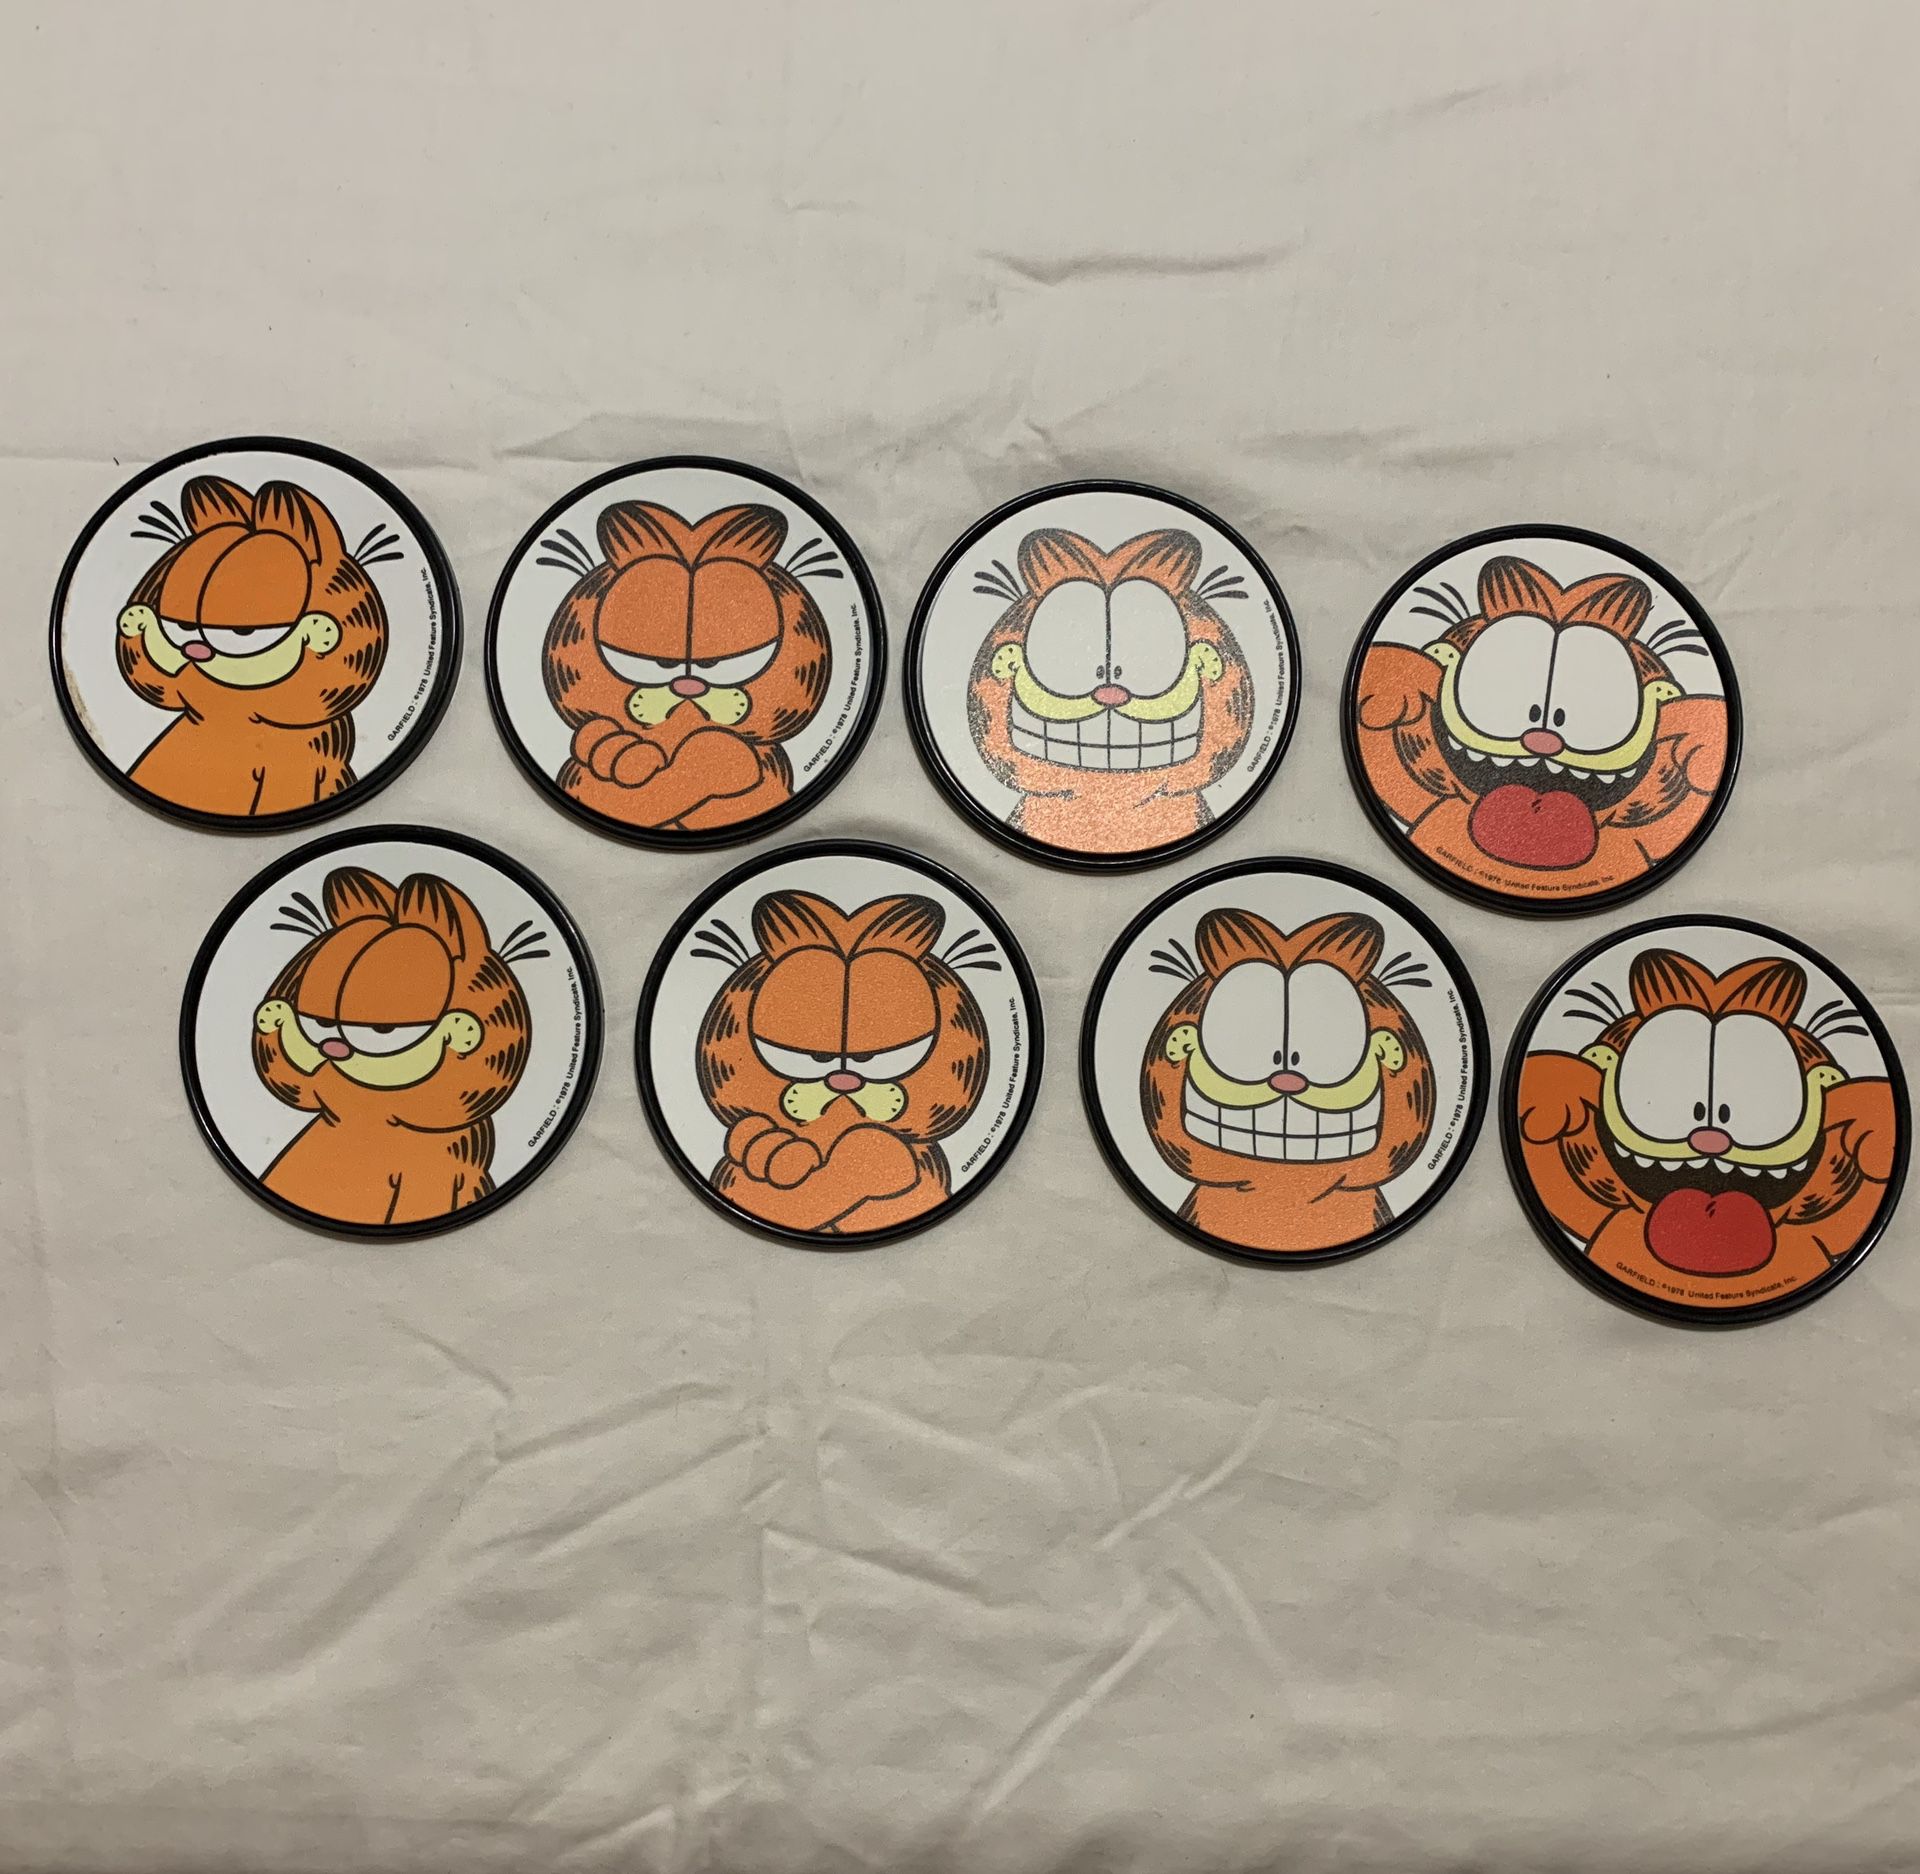 1978, two sets of 4 (8) Vintage Garfield Coasters